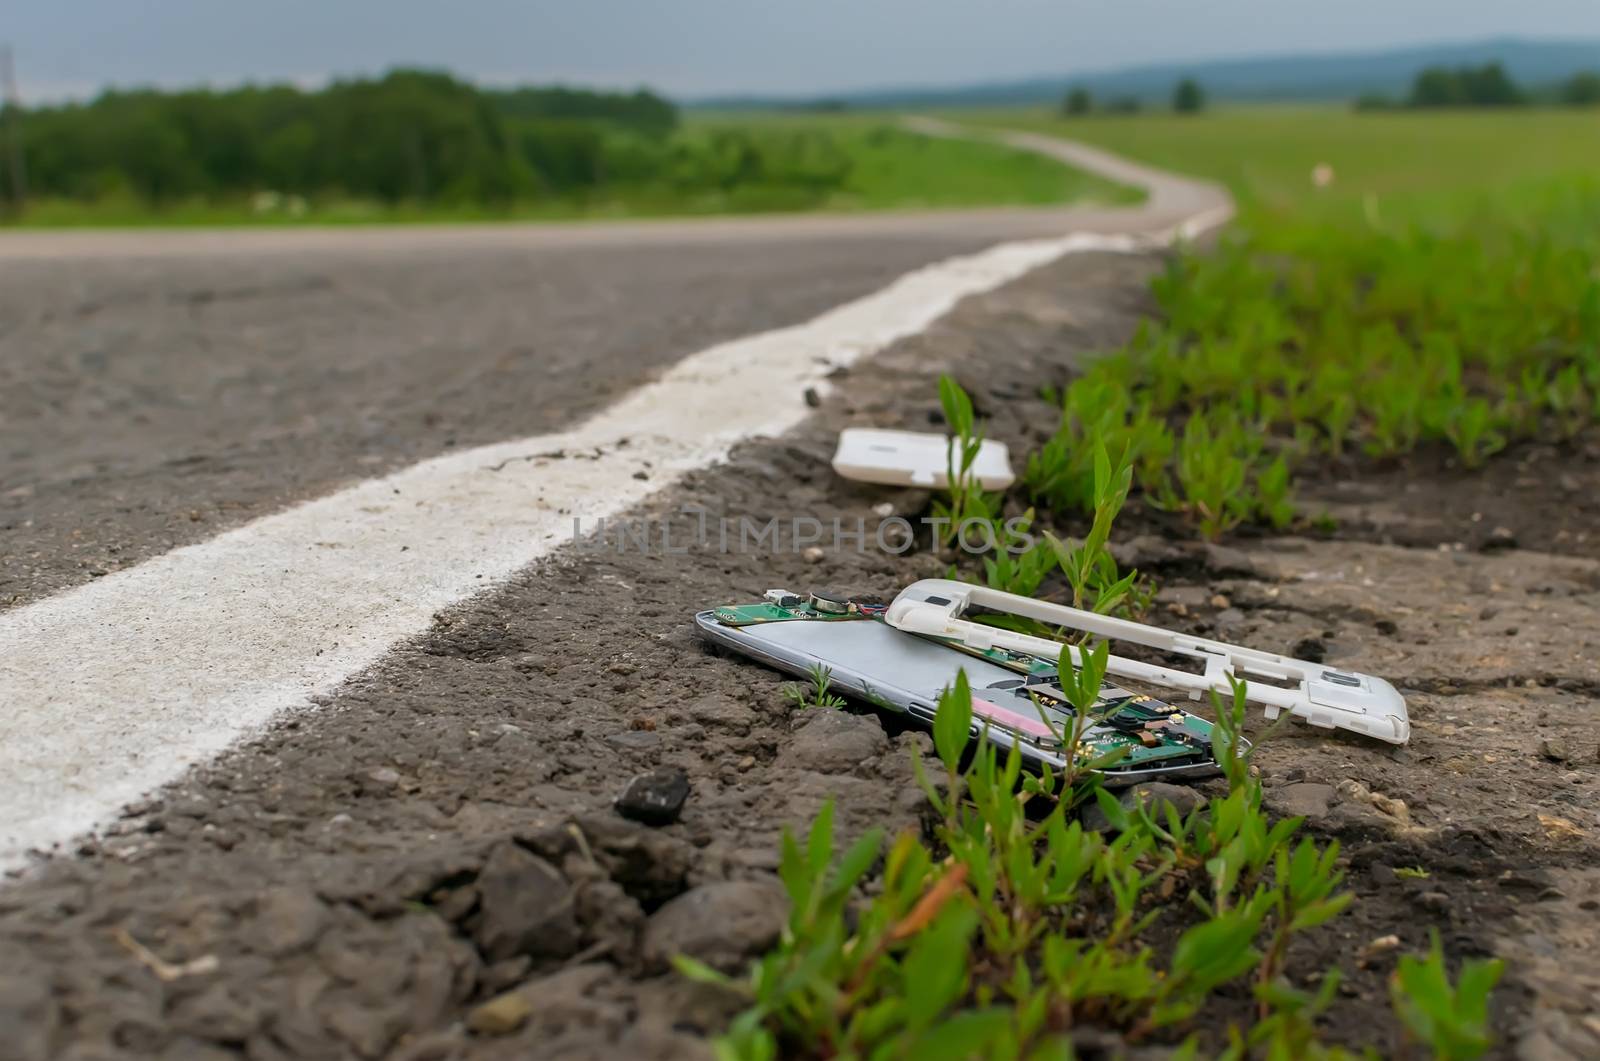 View of a mobile phone lying on the asphalt on a country road in cloudy weather by jk3030